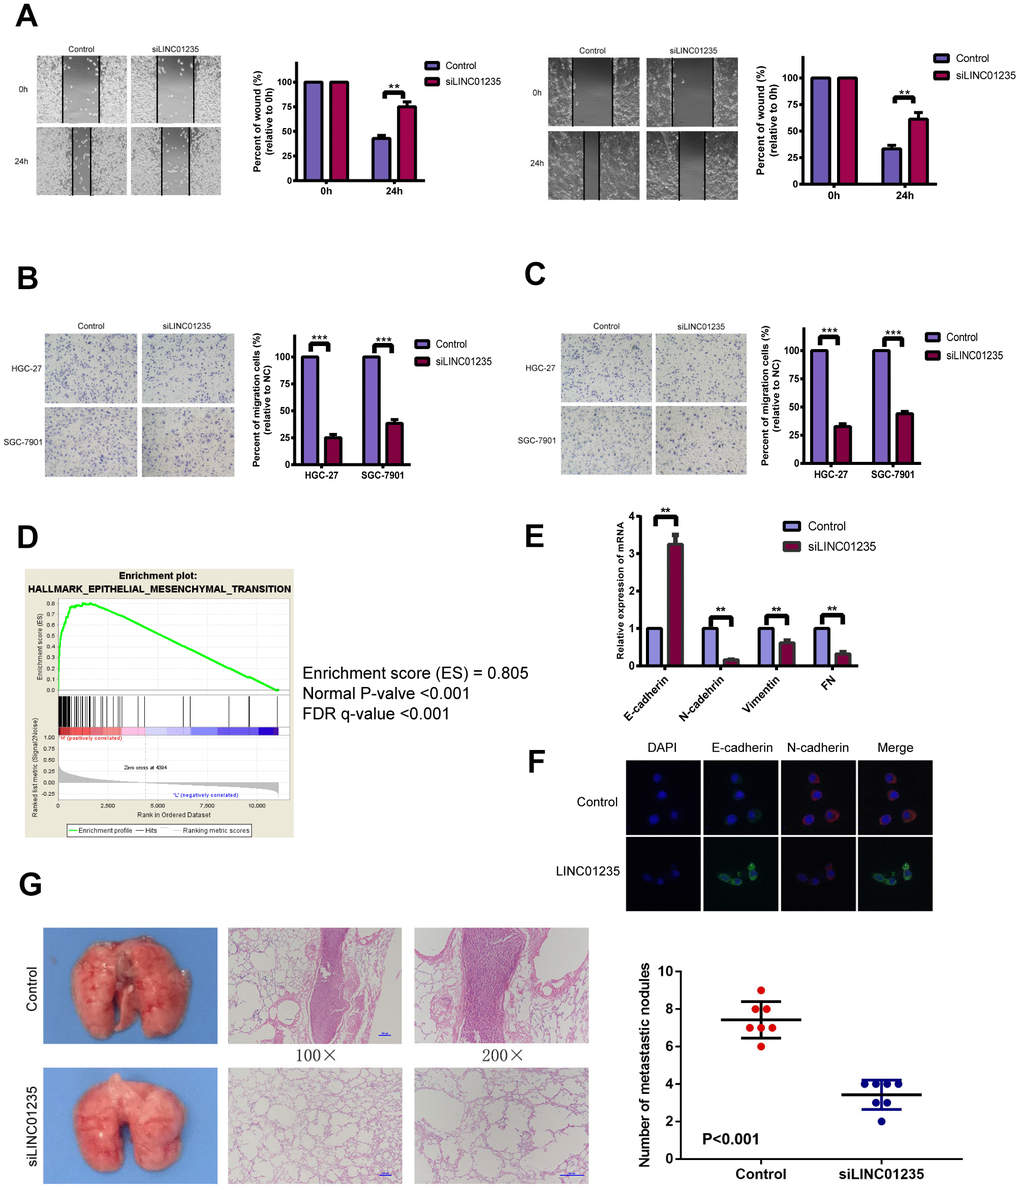 LINC01235 affects gastric cancer metastasis in vitro and vivo. (A) Wound-healing percentages at 24 h were largely inhibited in LINC01235-depleted HGC-27 and SGC-7901 cells, compared with control. In (B) migration and (C) Matrigel invasion assays, the number of migrated cells significantly decreased in LINC01235-silenced HGC-27 and SGC-7901 cells, compared with the control. (D) GSEA shows that LINC01235 may have a vital function in EMT. (E) RT-qPCR analyses of effects of LINC01235 depletion on expression of EMT-related genes in HGC-27 cells. (F) Immunofluorescence assay shows the expression of EMT in control/LINC01235-silenced cells. Green indicates E-cadherin and red indicates N-cadherin. (G) Representative tumor nodules in lungs of nude mice that were intravenously injected with control and LINC01235-silenced HGC-27 cells. Results are expressed as means ± SD. ** and ***: P 